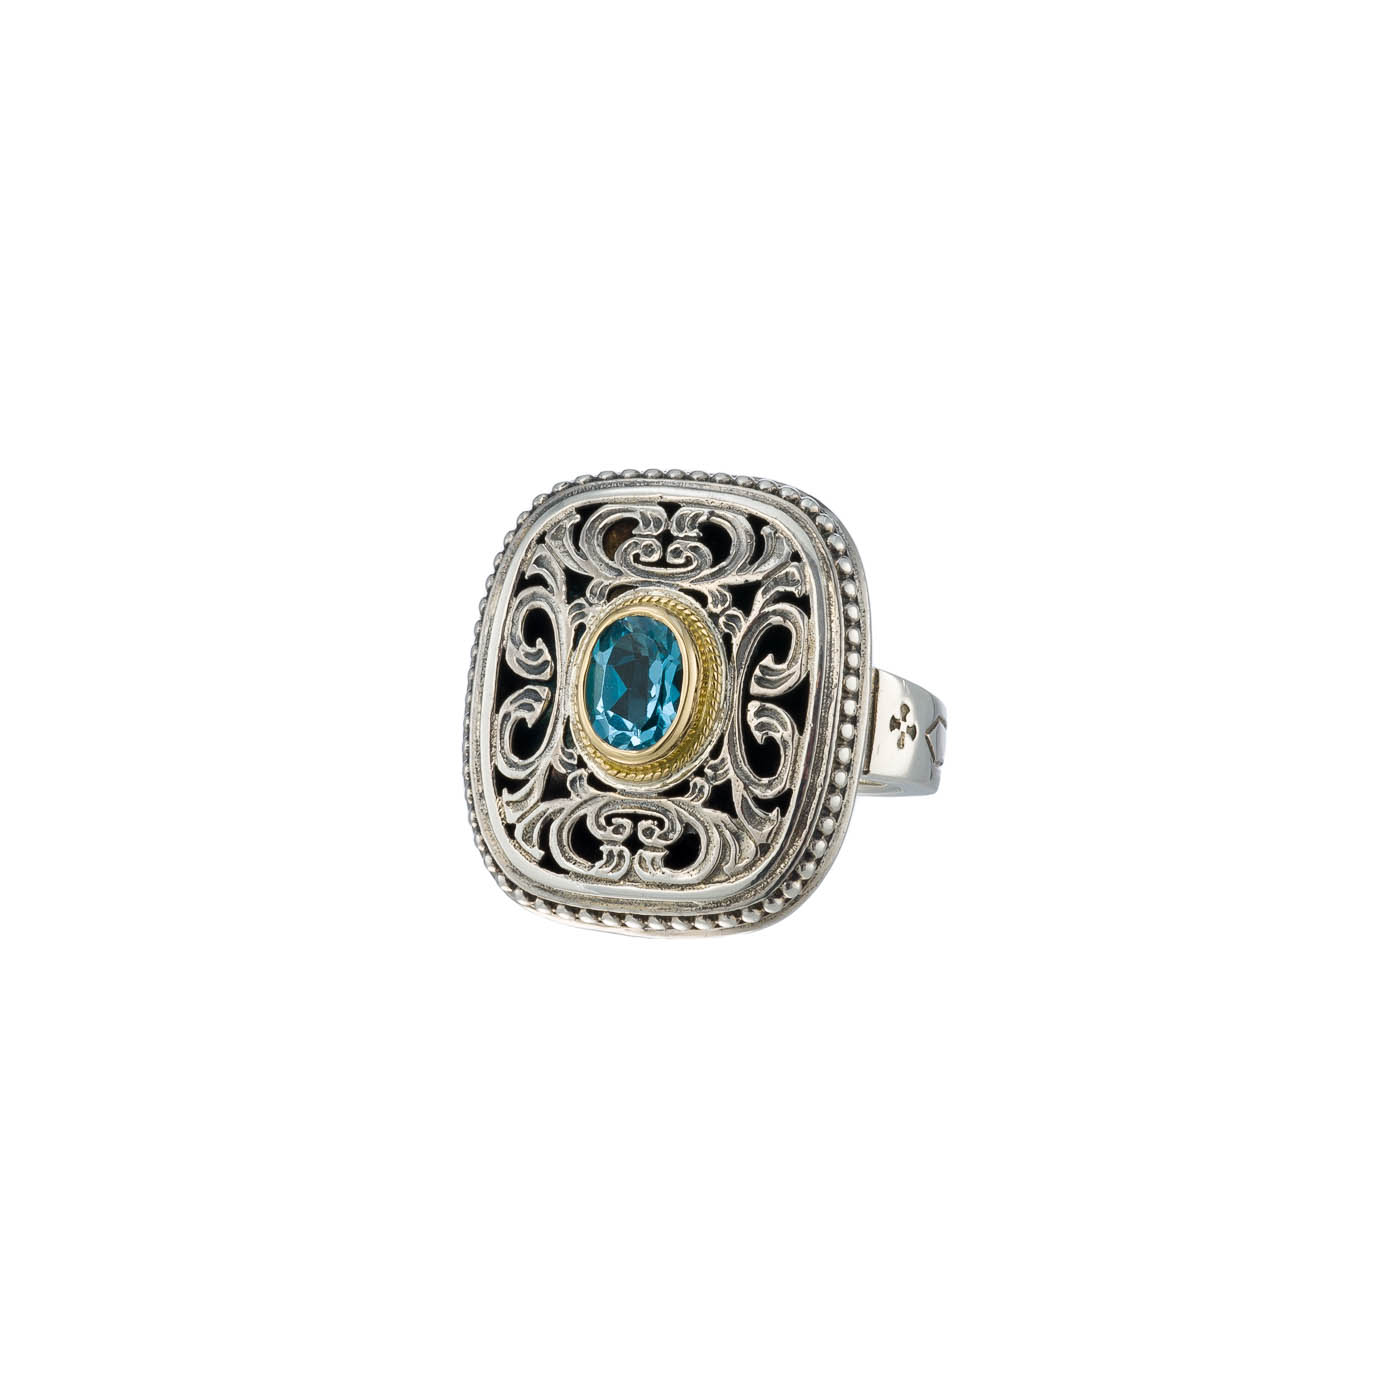 Garden shadows flat ring in 18K Gold and sterling silver with blue topaz